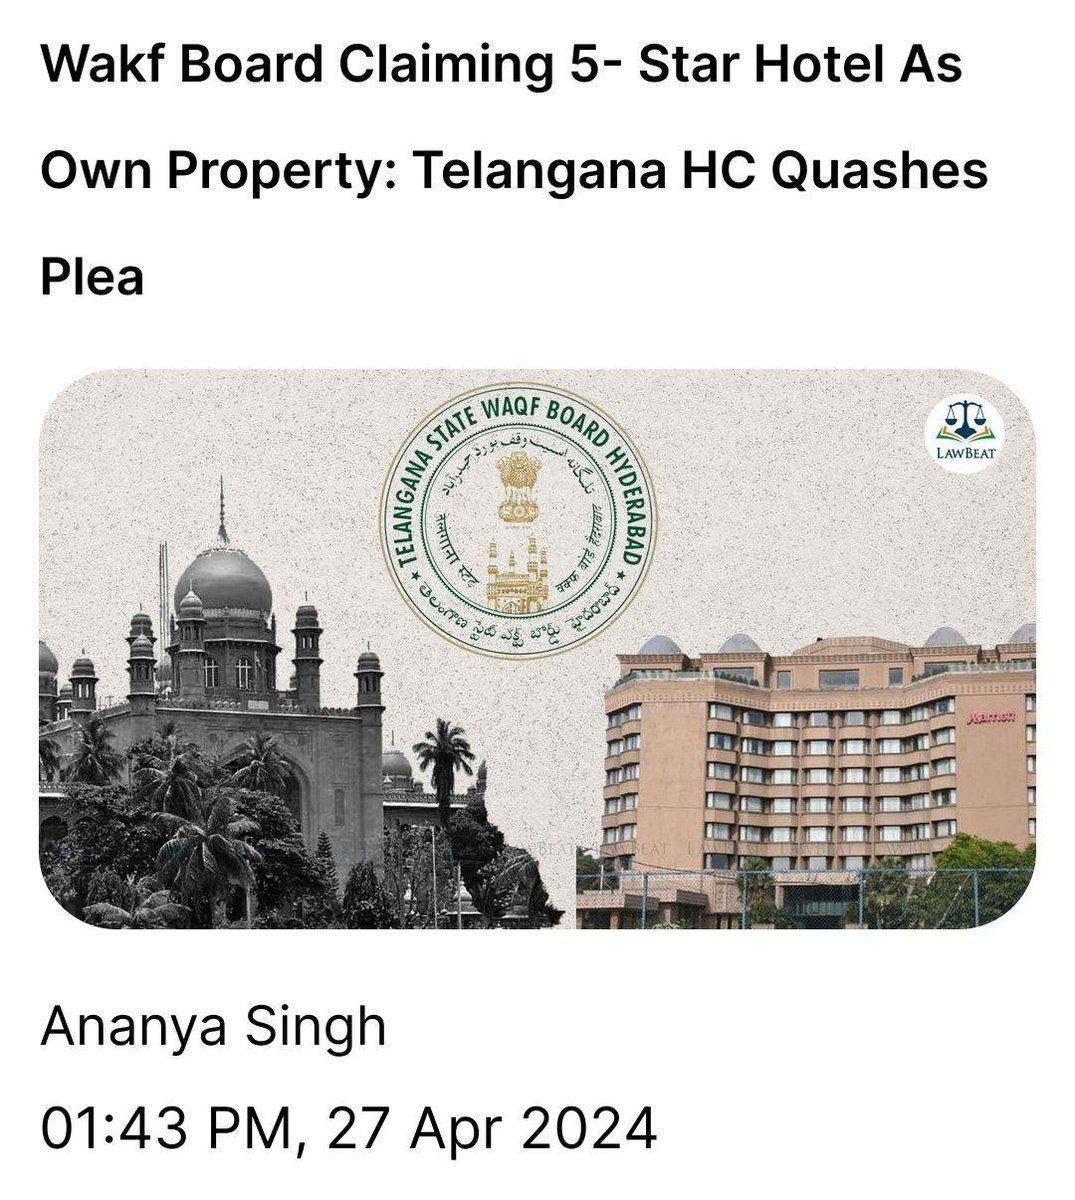 Wakf Board claimed Hotel Marriot in Hyderabad. Wakf Act,1954 of CONgress allows such blatant misuse of law to claim anyone's properties! If this happens with a 5-Star Hotel, think what CONgress will do with your Home/Jewellery/Investments with its Redistribution of Wealth plan!